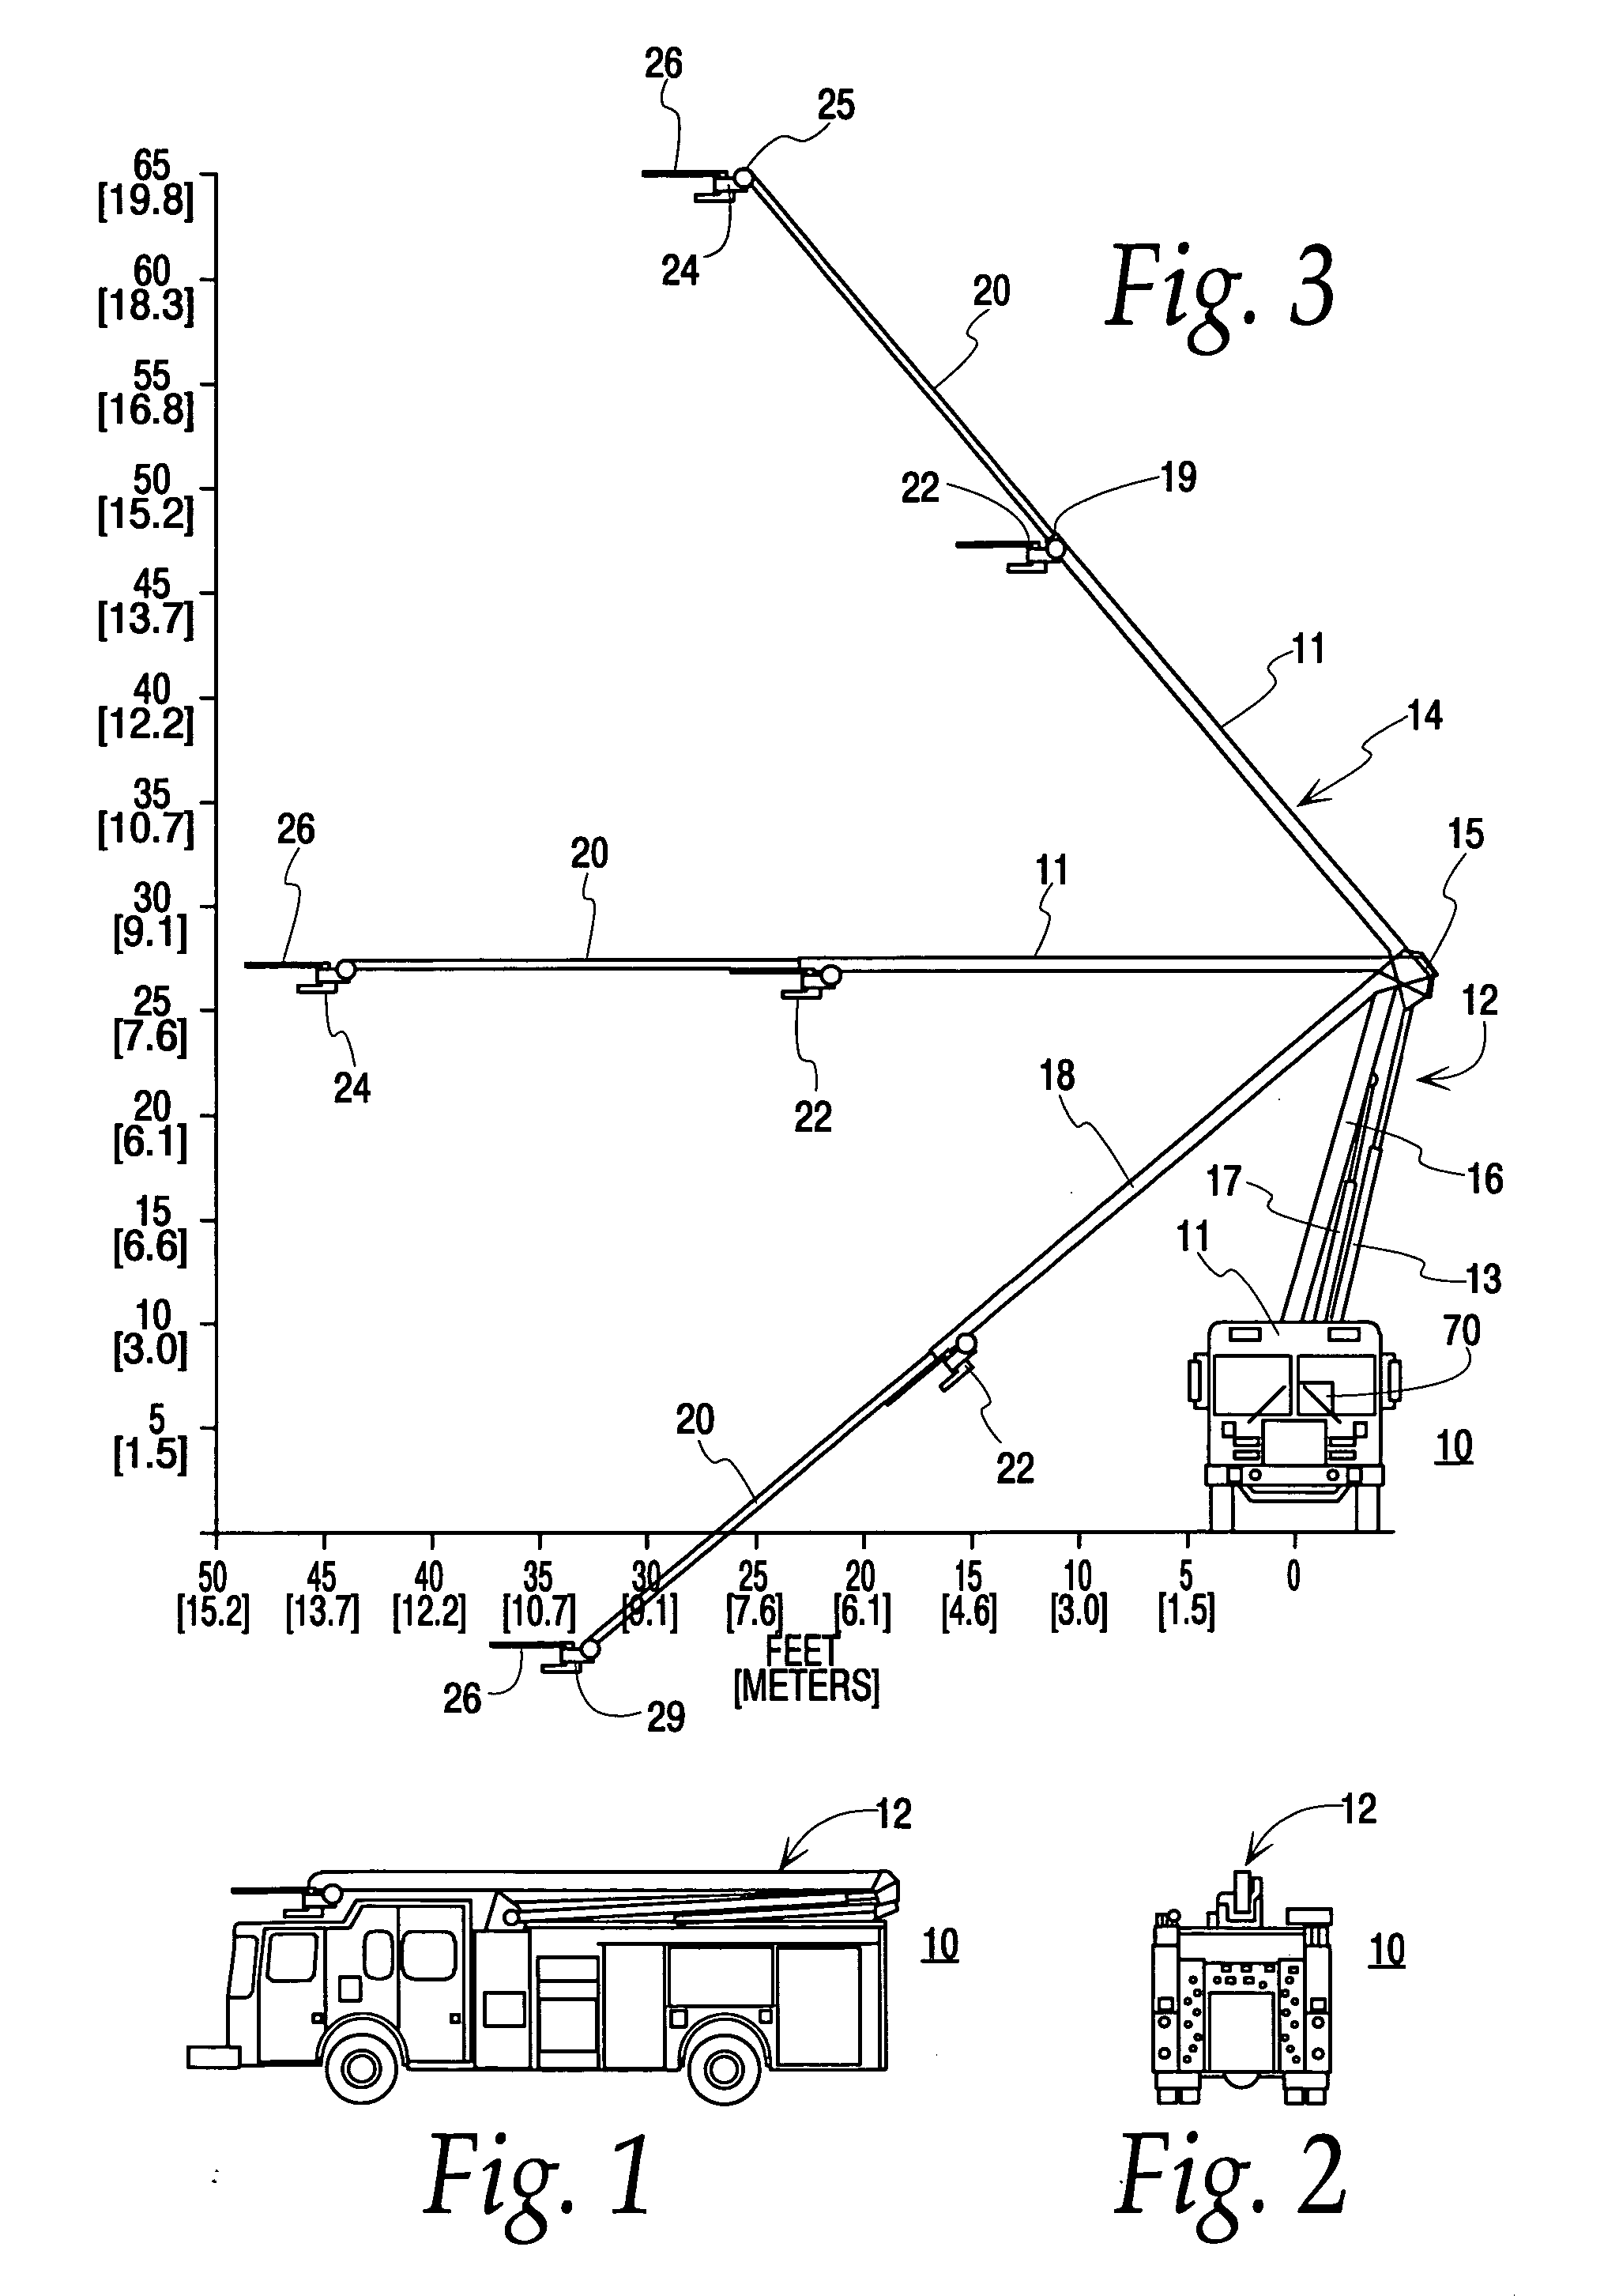 Extensible aerial boom having two independently operated fluid nozzles